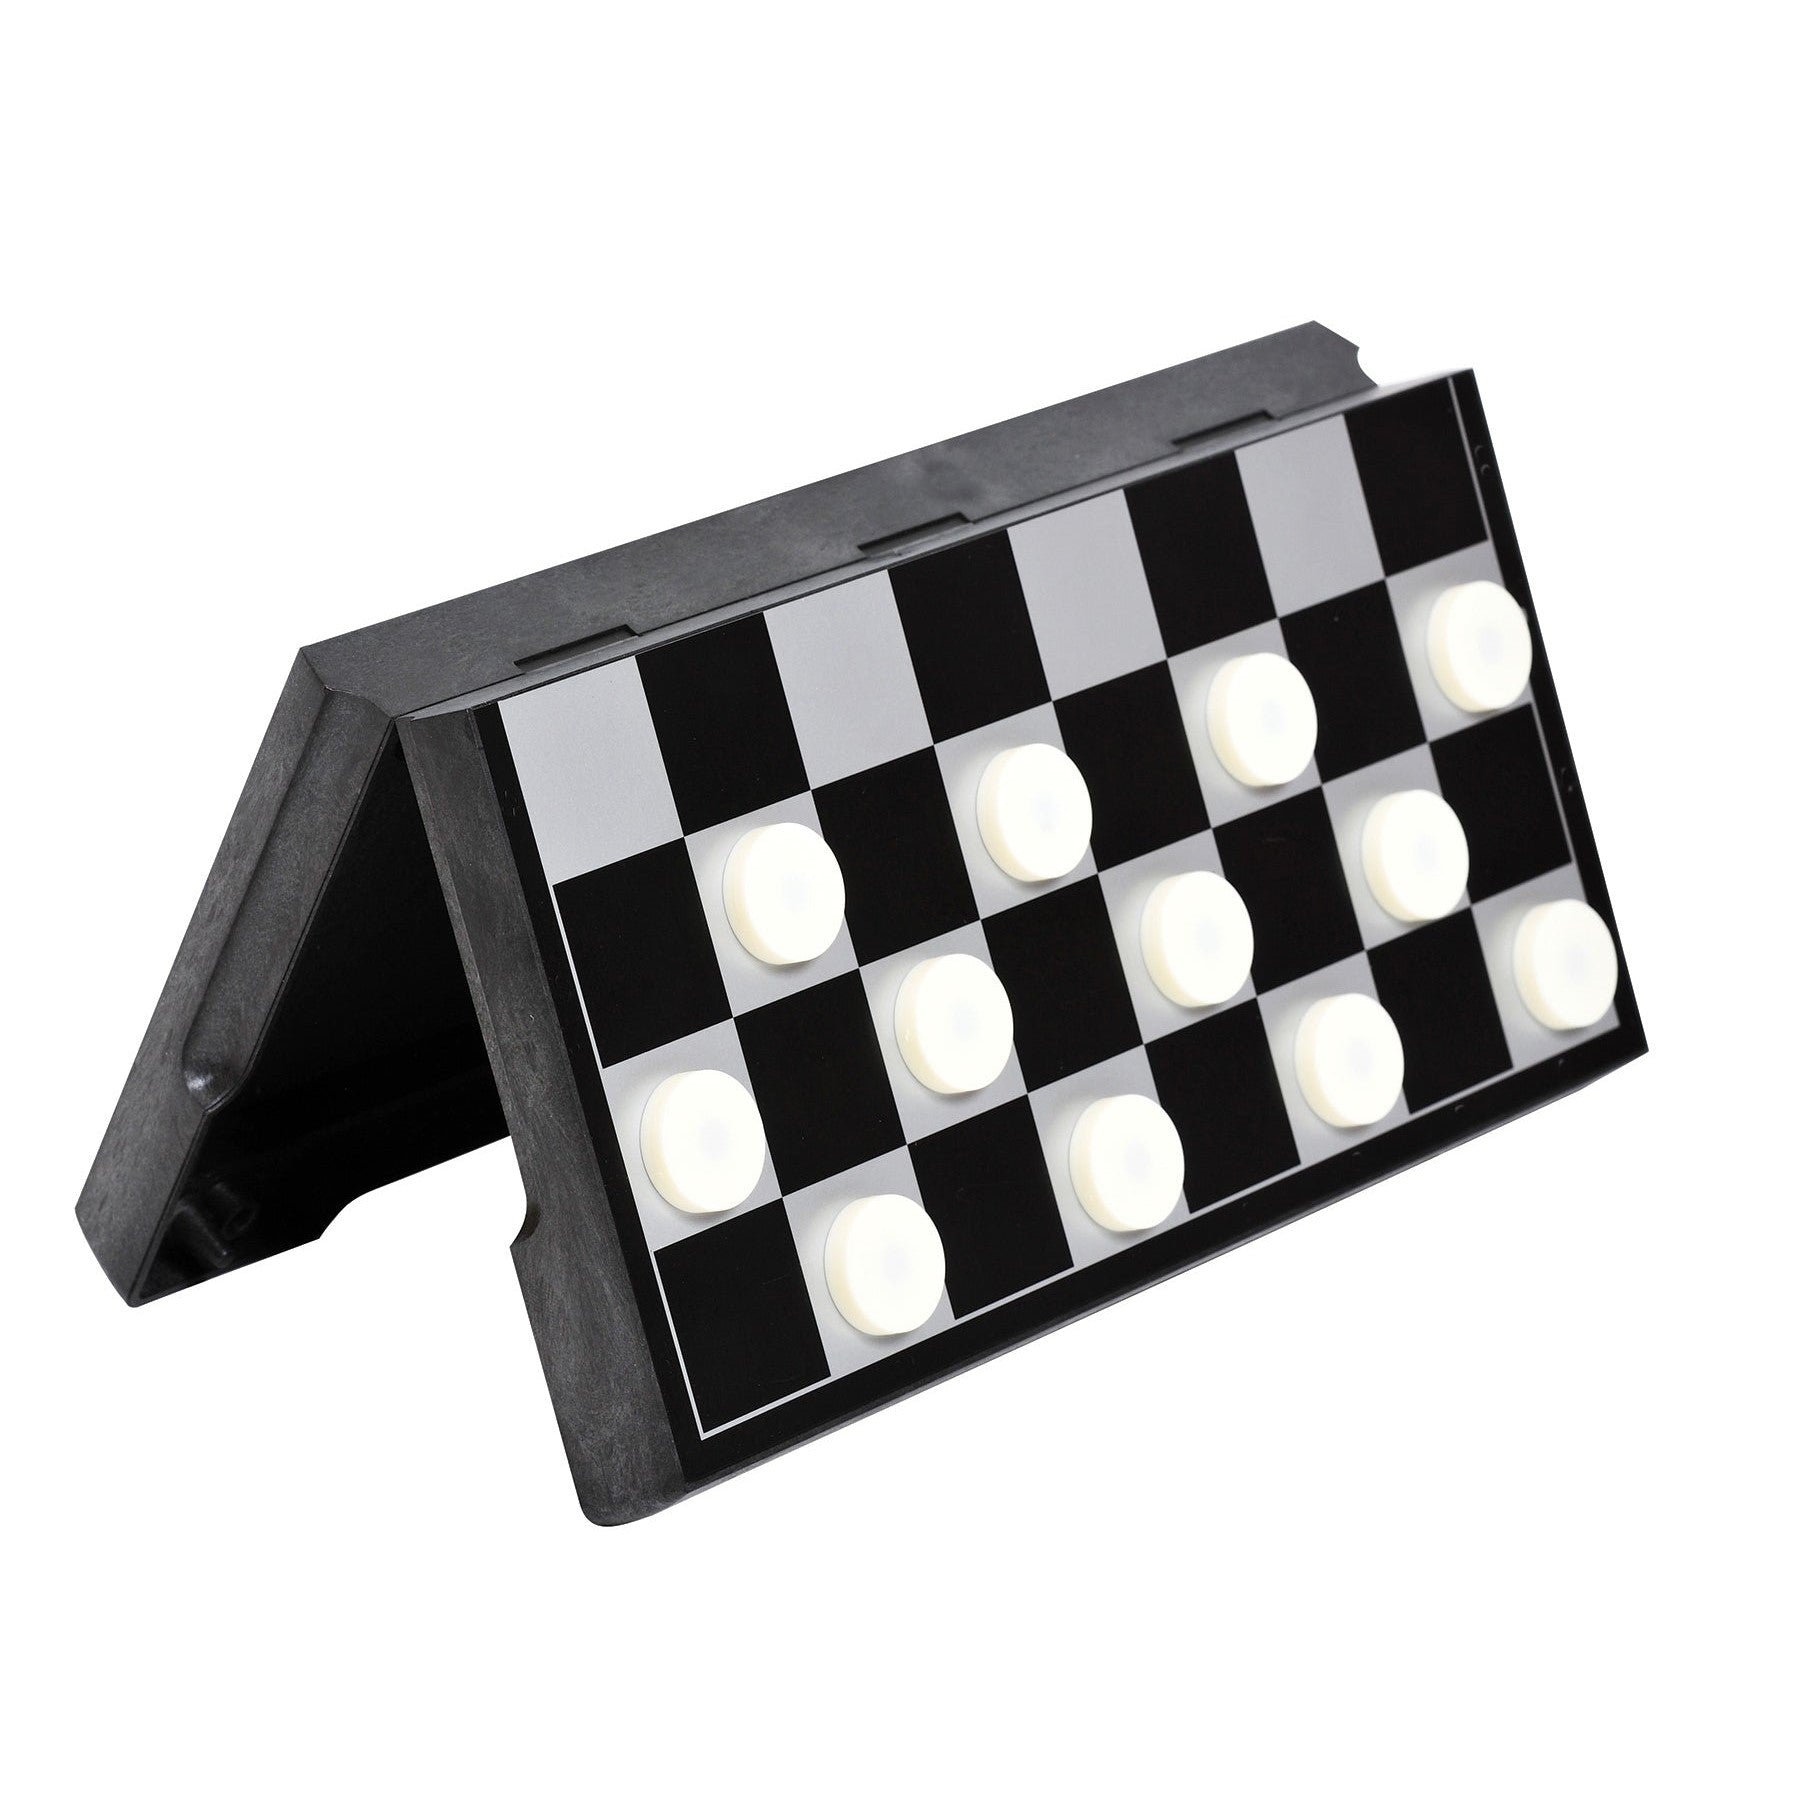 Magnetic Checkers Game